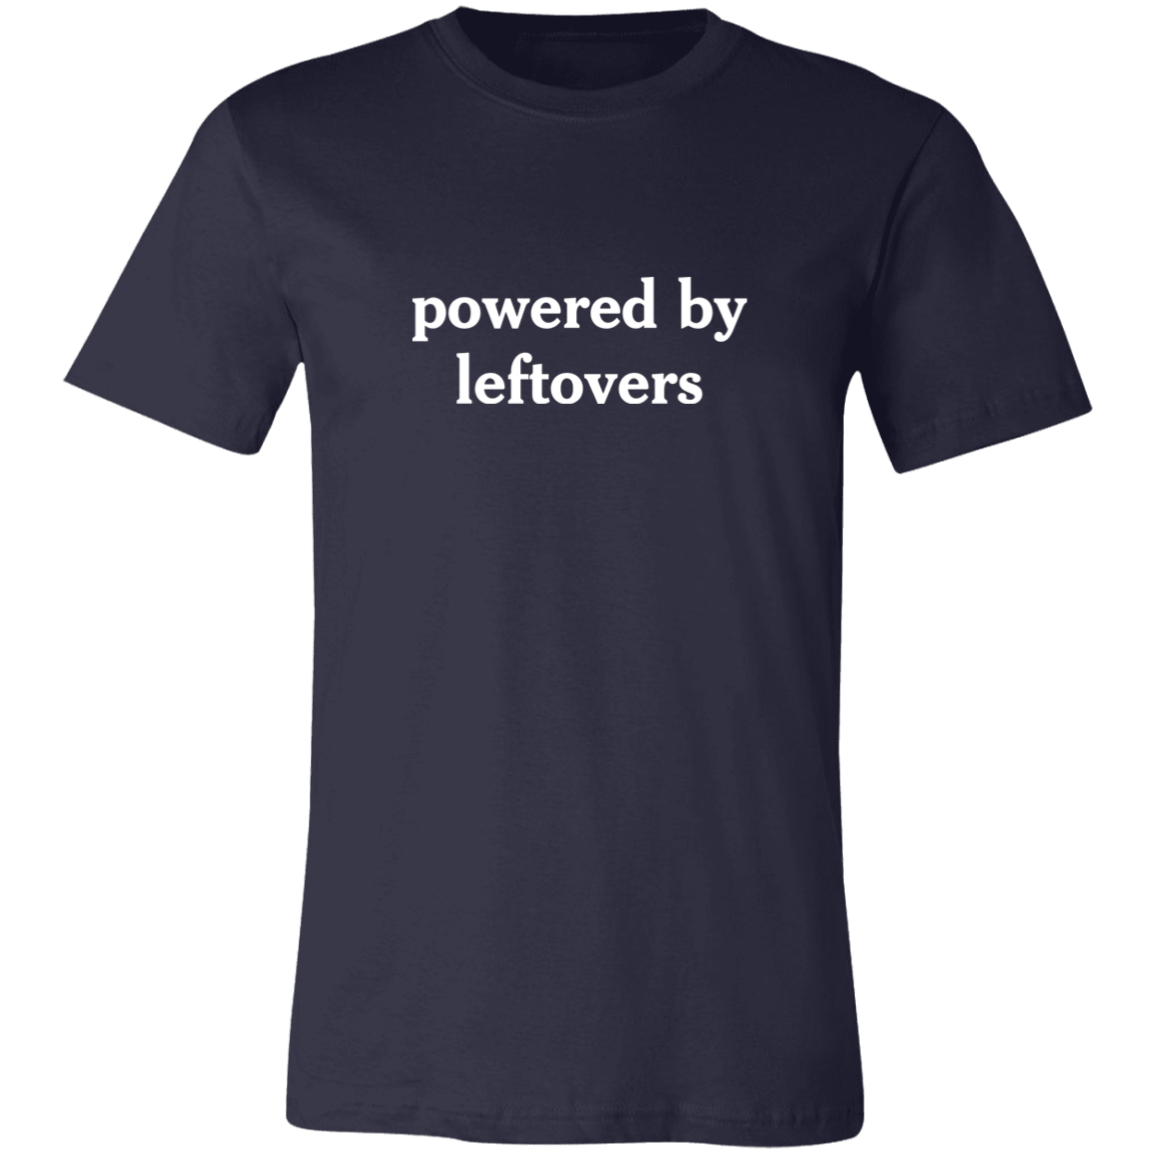 powered by leftovers tee